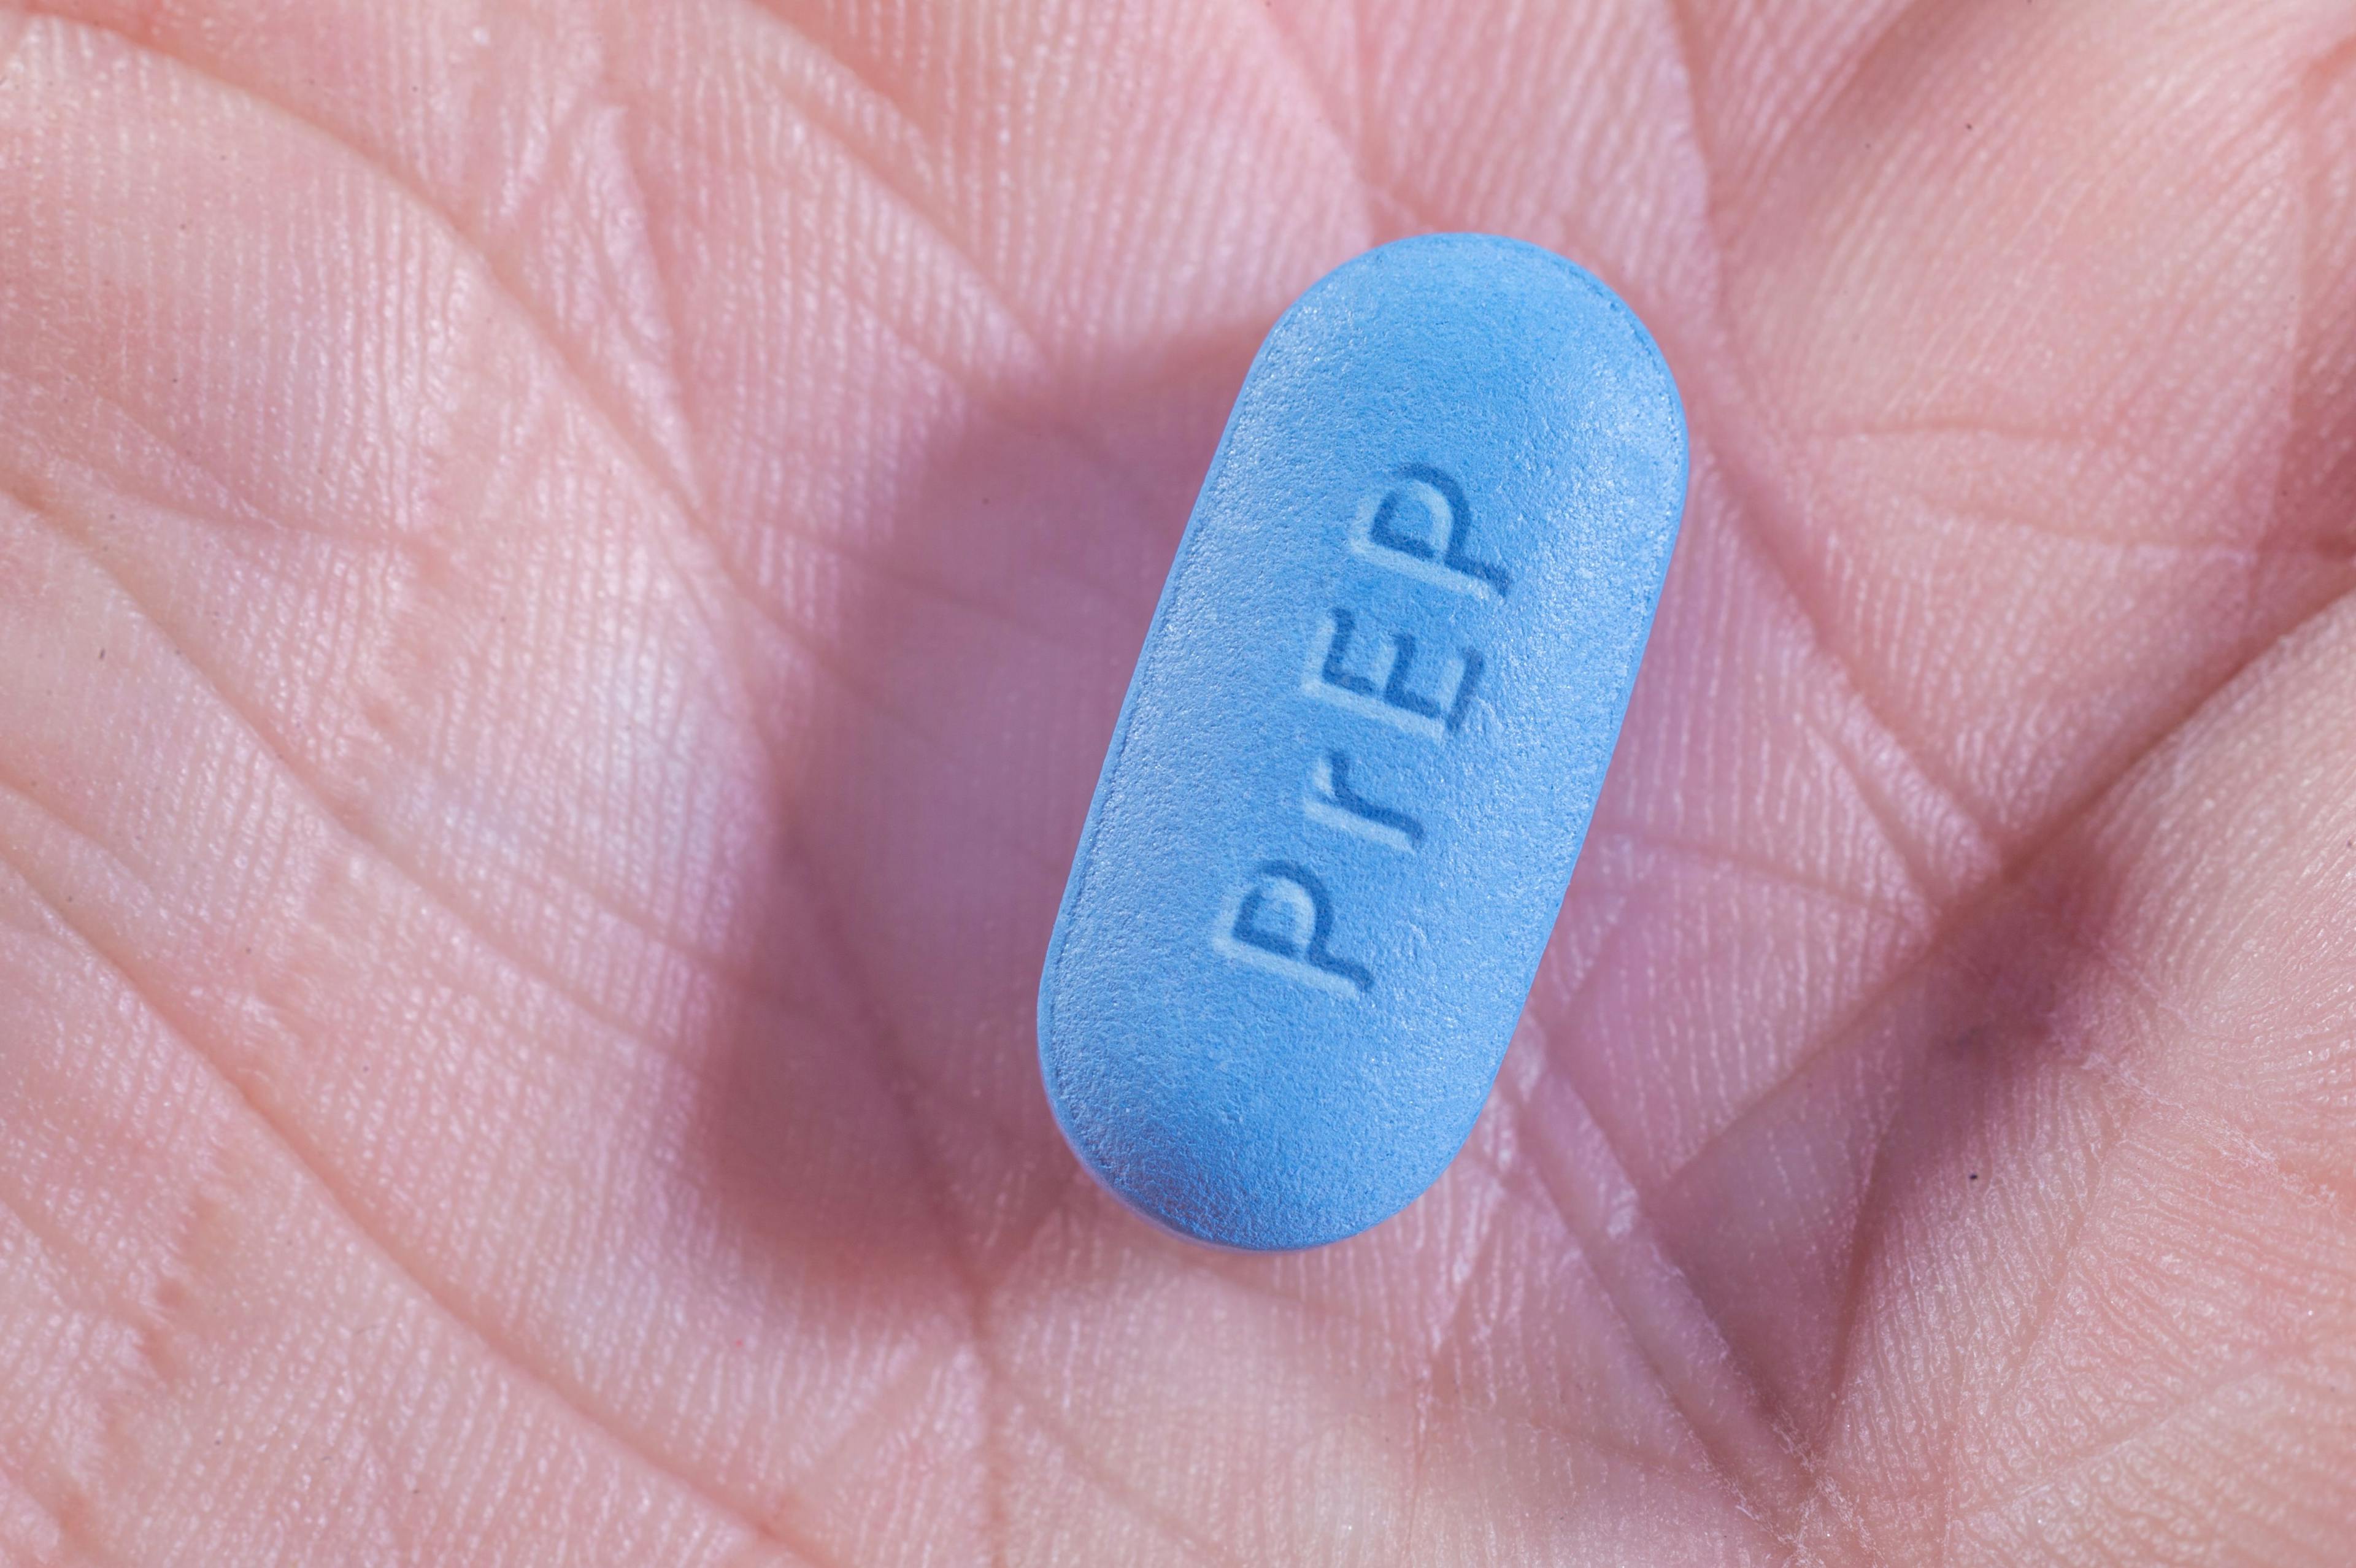 Study: Adherence to PrEP Increases Prevention of HIV